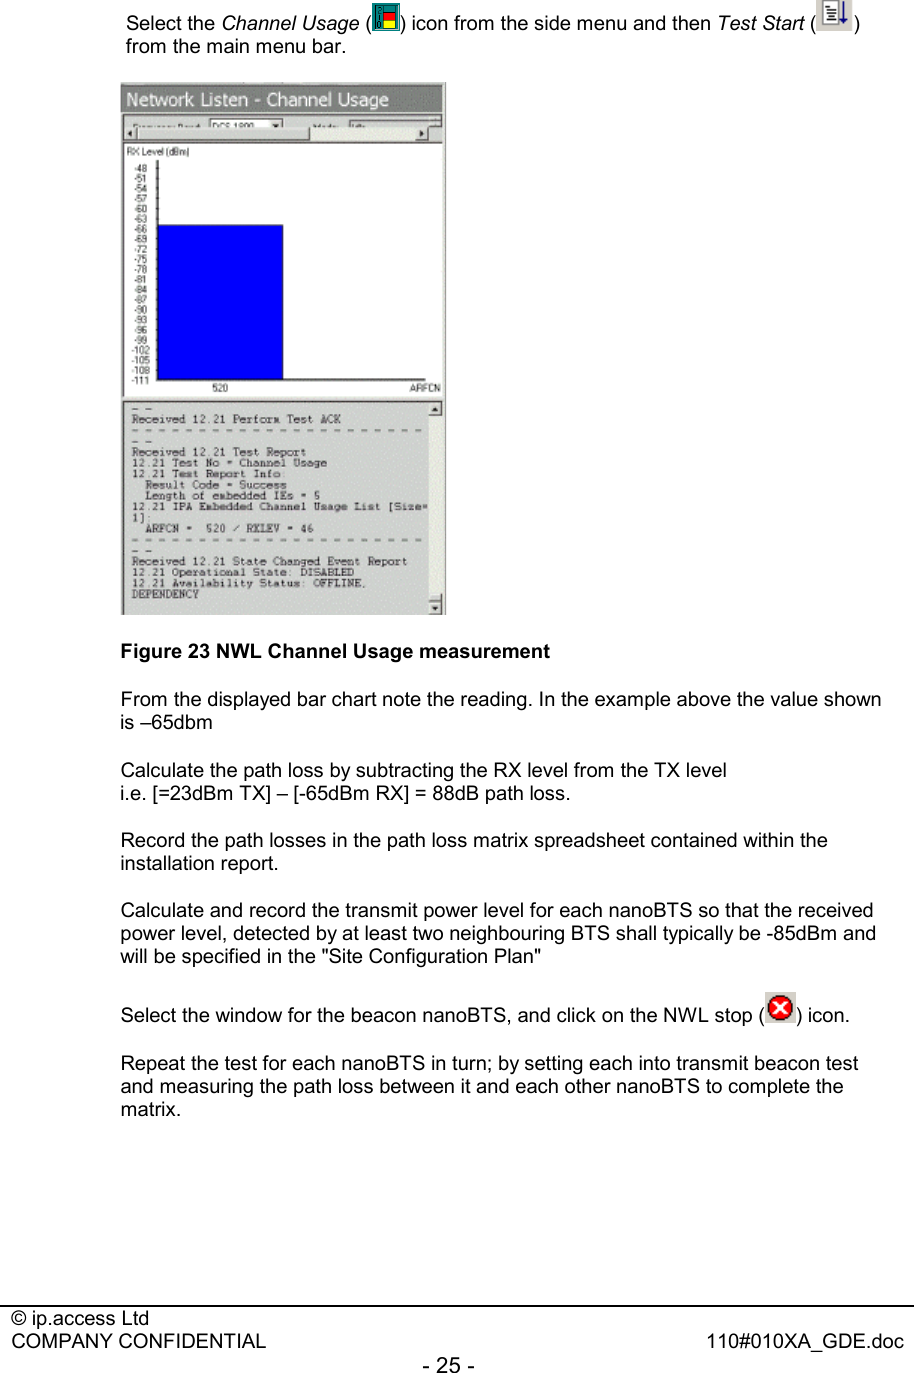  © ip.access Ltd   COMPANY CONFIDENTIAL  110#010XA_GDE.doc - 25 -  Select the Channel Usage ( ) icon from the side menu and then Test Start ( ) from the main menu bar.  Figure 23 NWL Channel Usage measurement   From the displayed bar chart note the reading. In the example above the value shown is –65dbm   Calculate the path loss by subtracting the RX level from the TX level  i.e. [=23dBm TX] – [-65dBm RX] = 88dB path loss.   Record the path losses in the path loss matrix spreadsheet contained within the installation report.   Calculate and record the transmit power level for each nanoBTS so that the received power level, detected by at least two neighbouring BTS shall typically be -85dBm and will be specified in the &quot;Site Configuration Plan&quot;   Select the window for the beacon nanoBTS, and click on the NWL stop ( ) icon.   Repeat the test for each nanoBTS in turn; by setting each into transmit beacon test and measuring the path loss between it and each other nanoBTS to complete the matrix. 